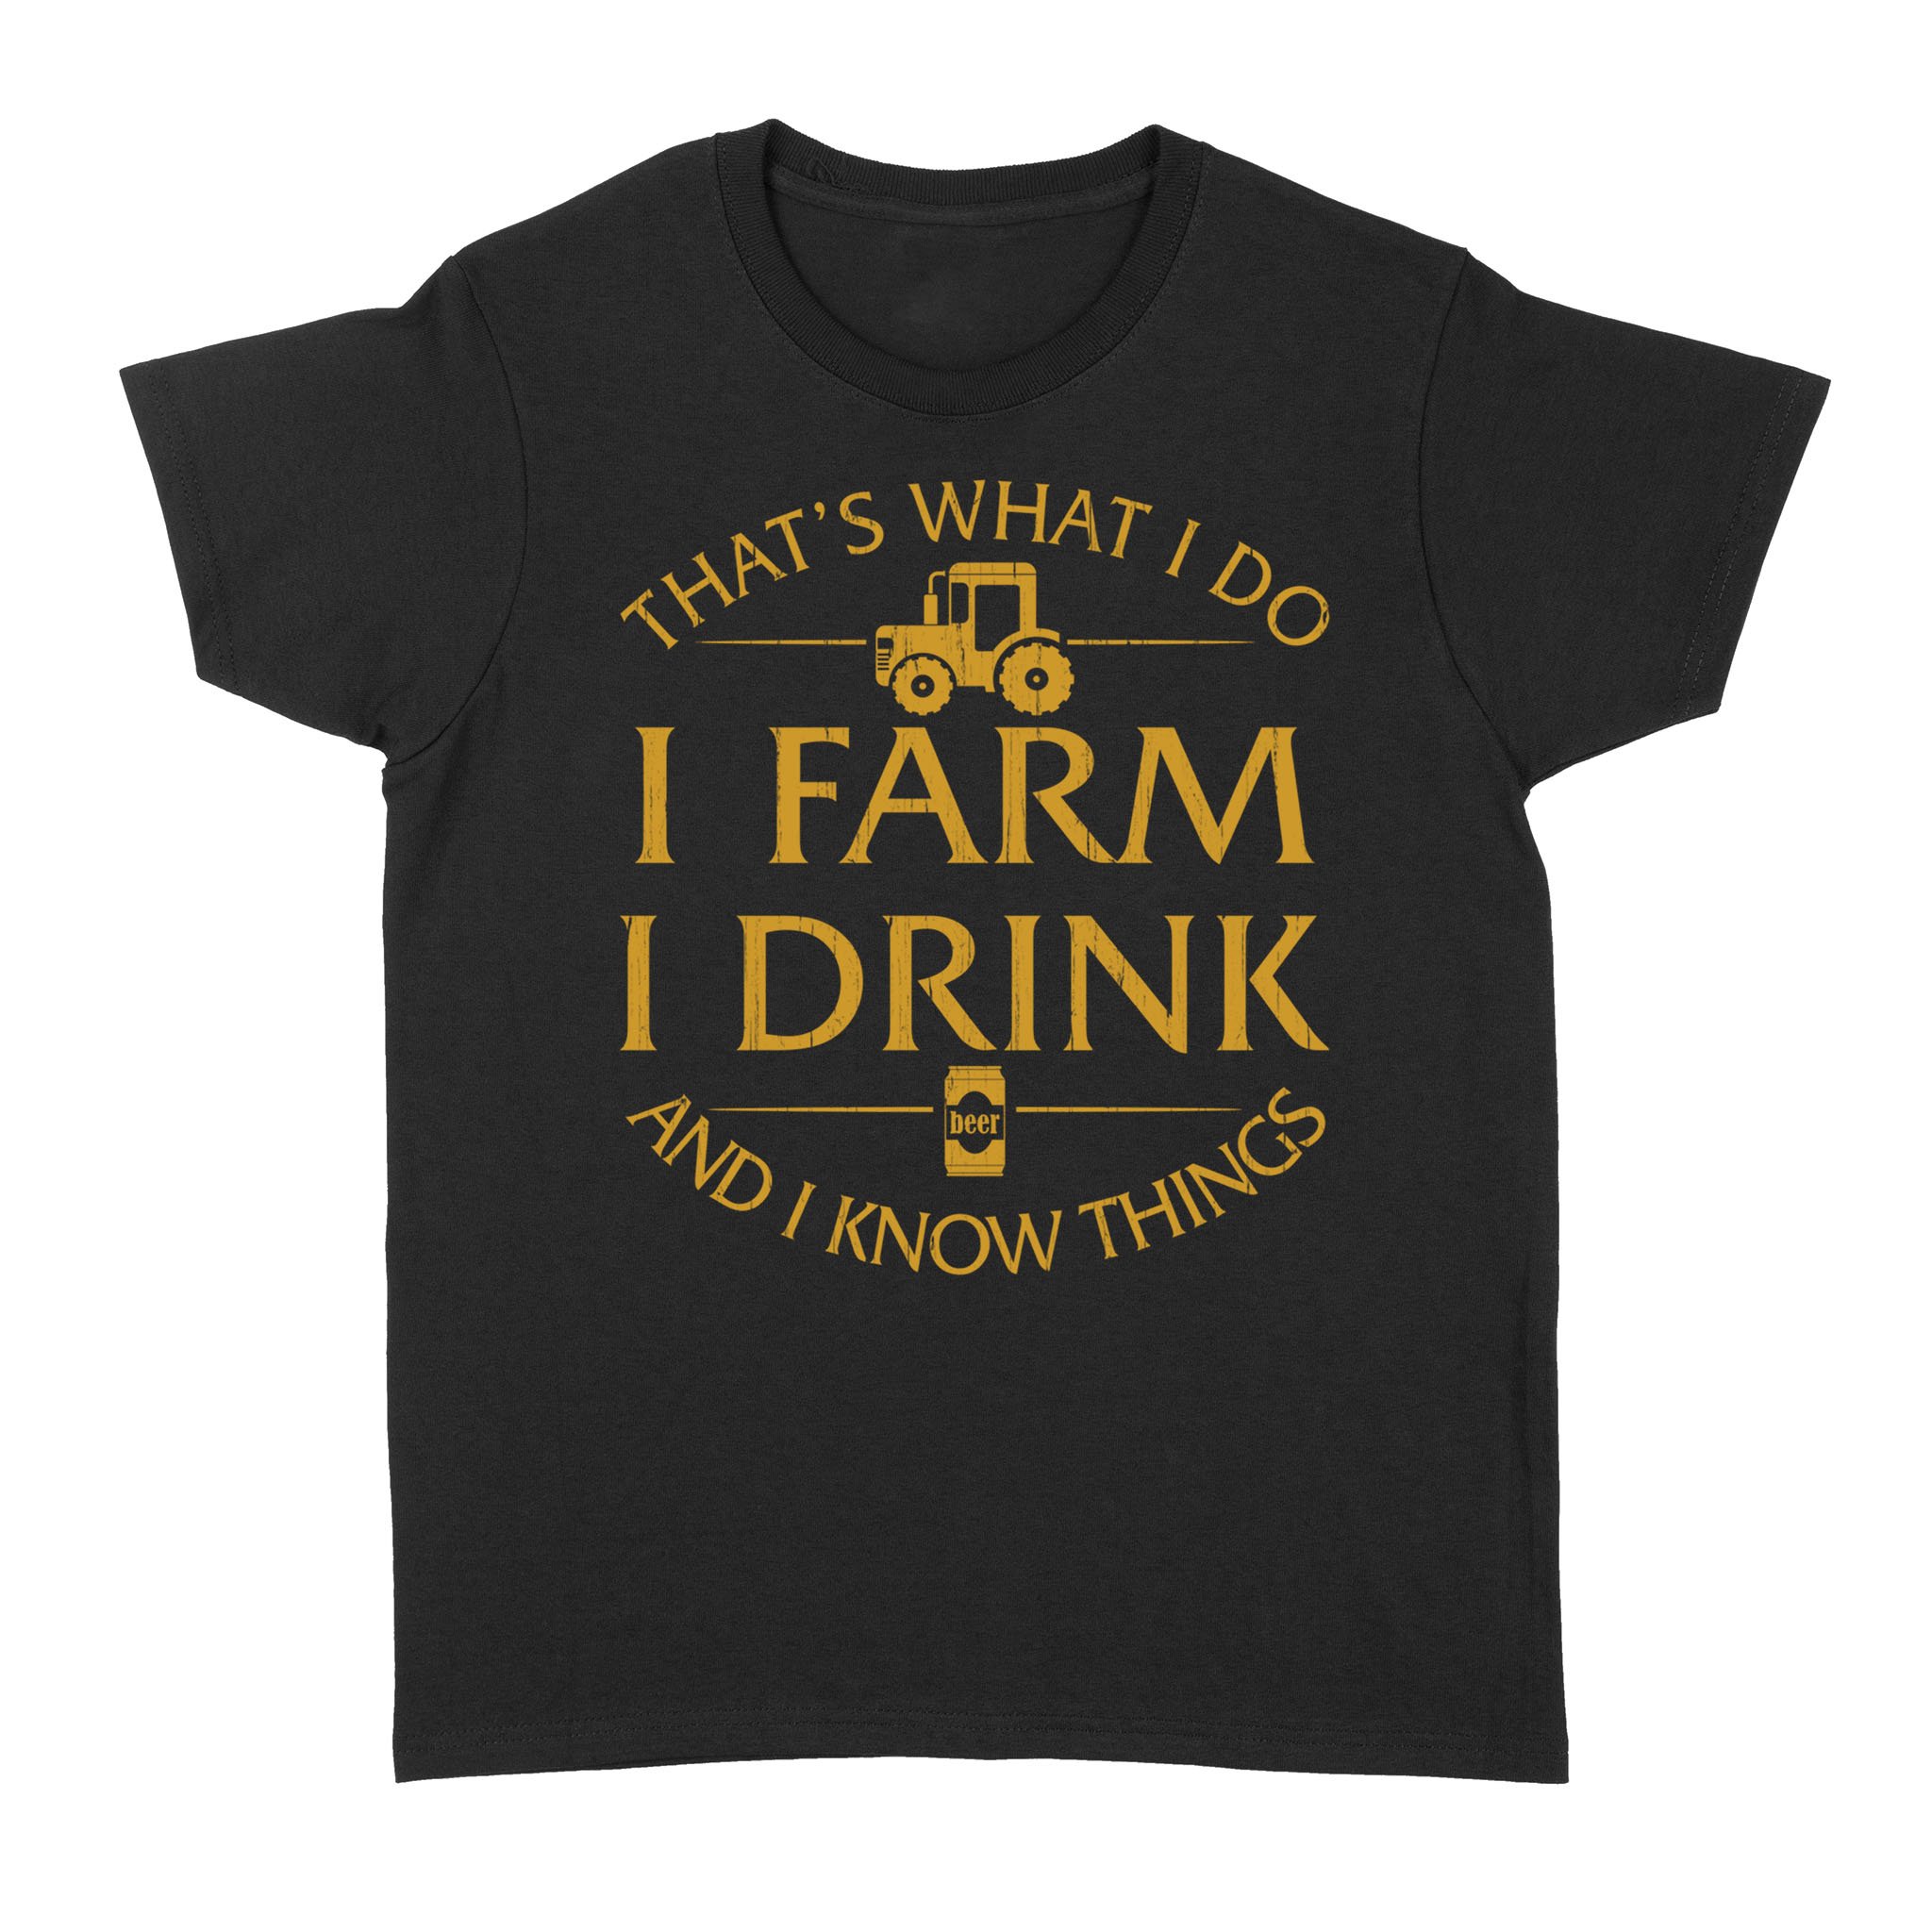 That s What I Do I Farm I Drink Beer And I Know Things Shirt – Standard Women’s T-shirt